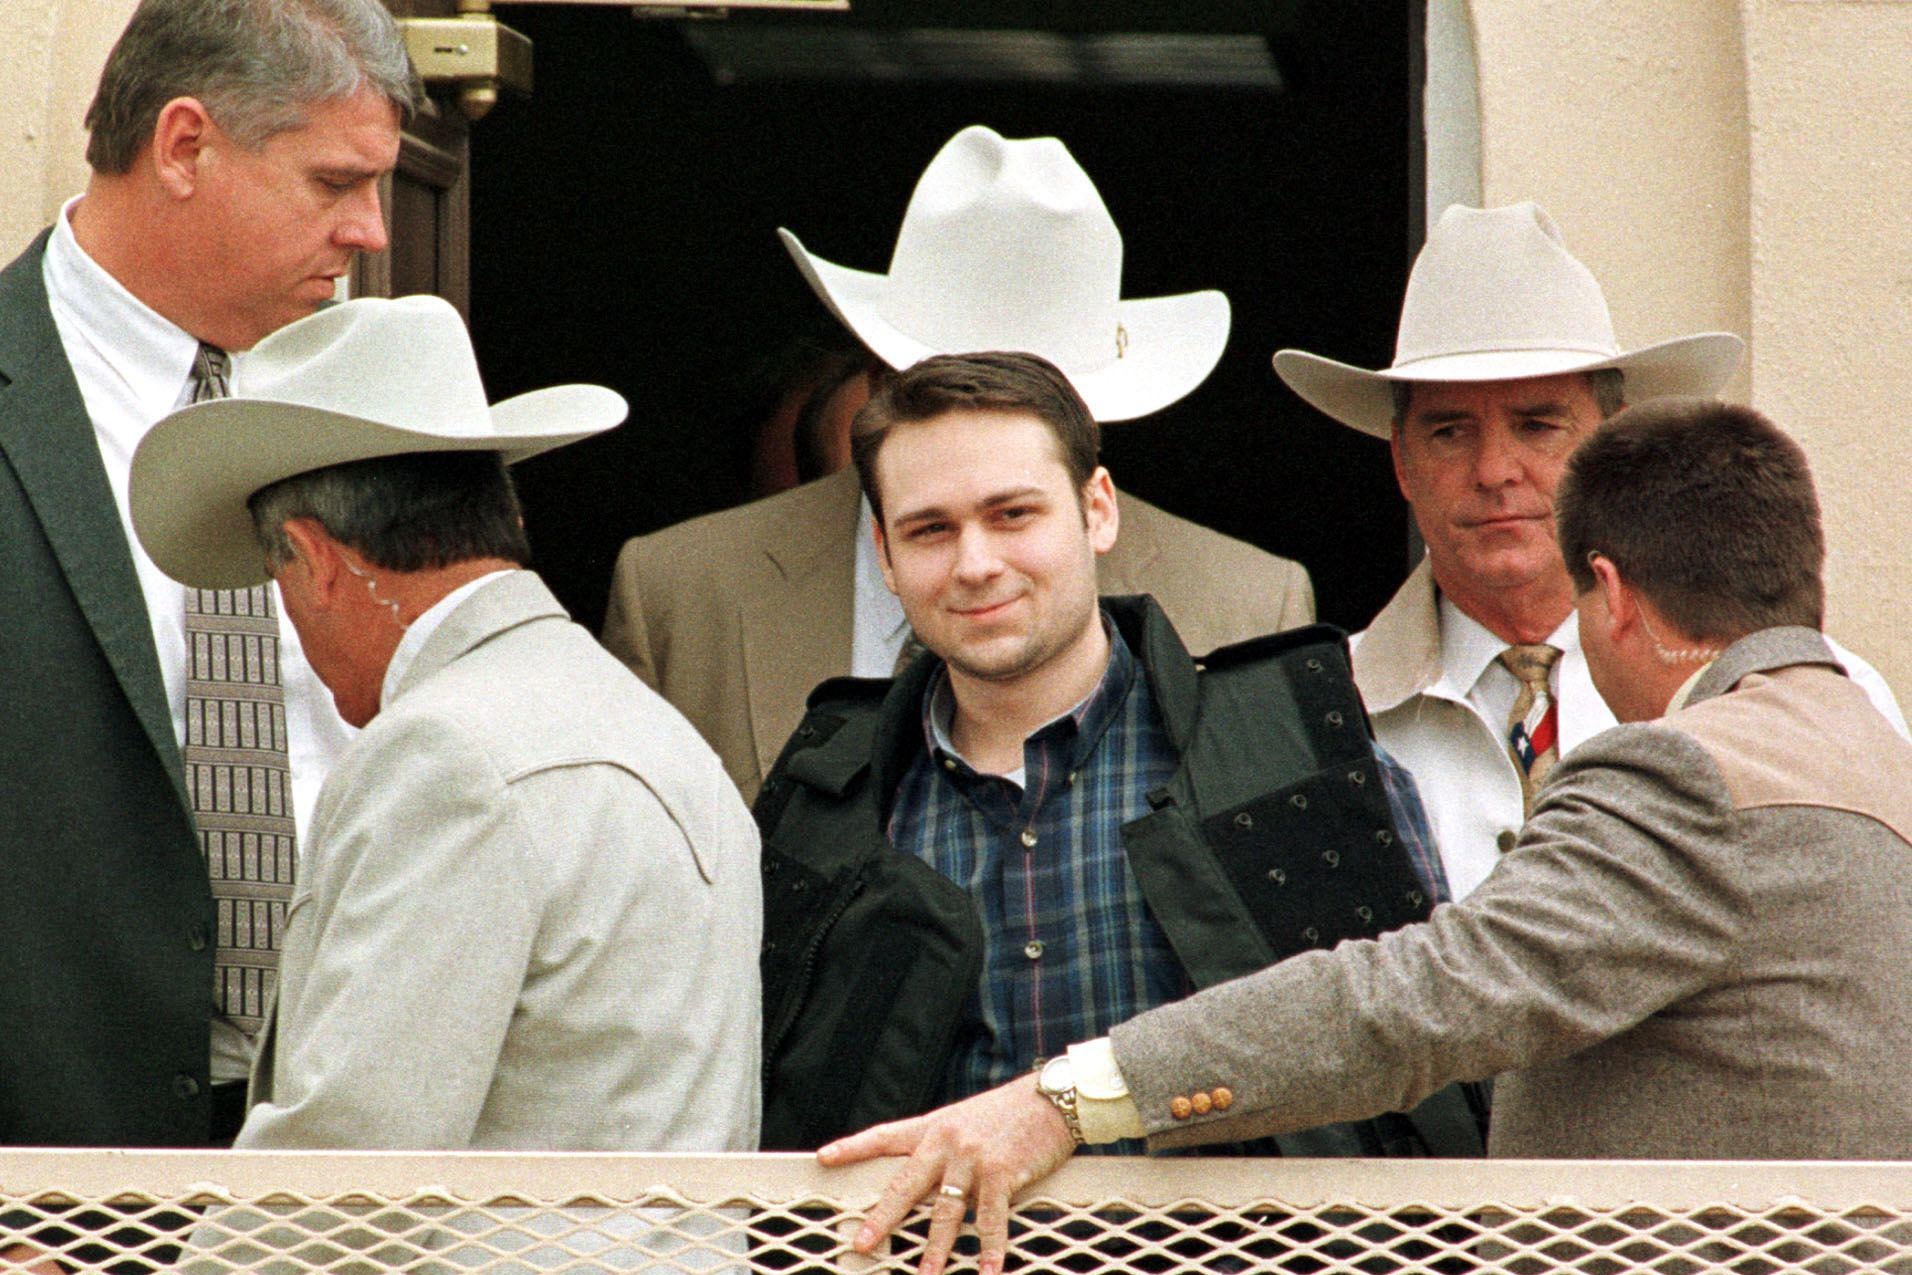  John William King is led from the Jasper County Courthouse in Feb. 1999 after a jury sentenced him to death.